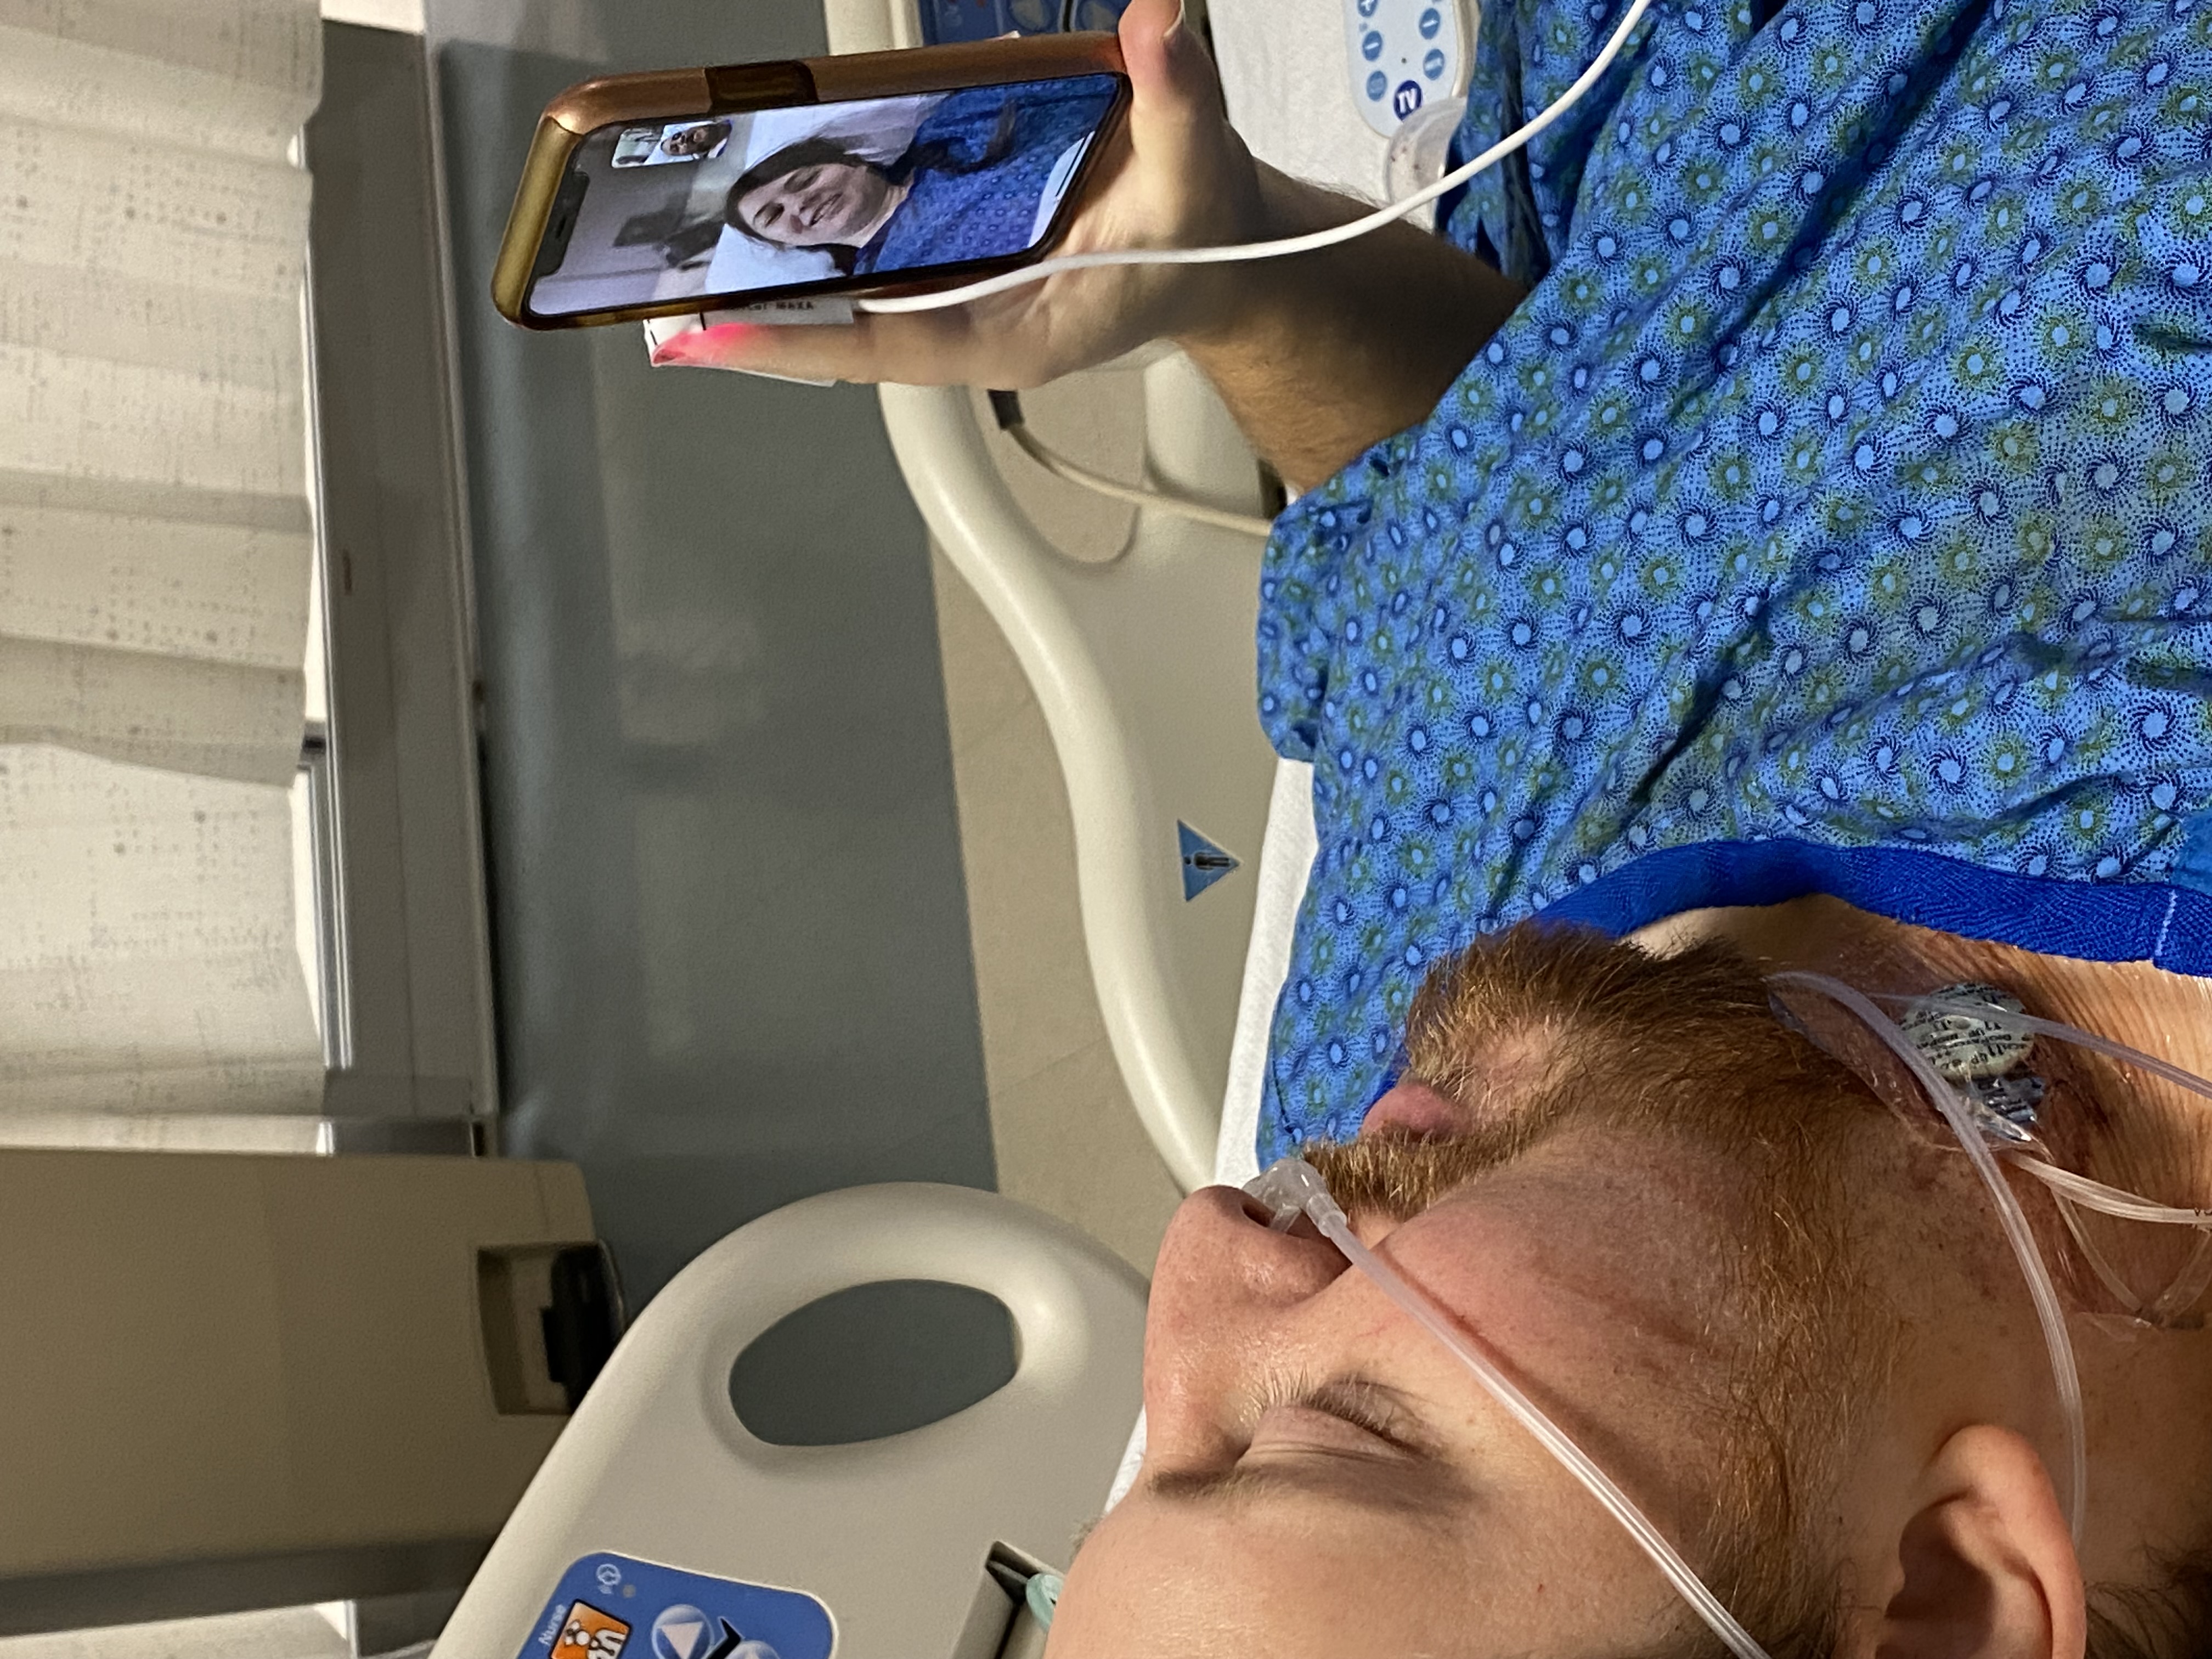 Colin visiting with Kelsey by phone from the hospital